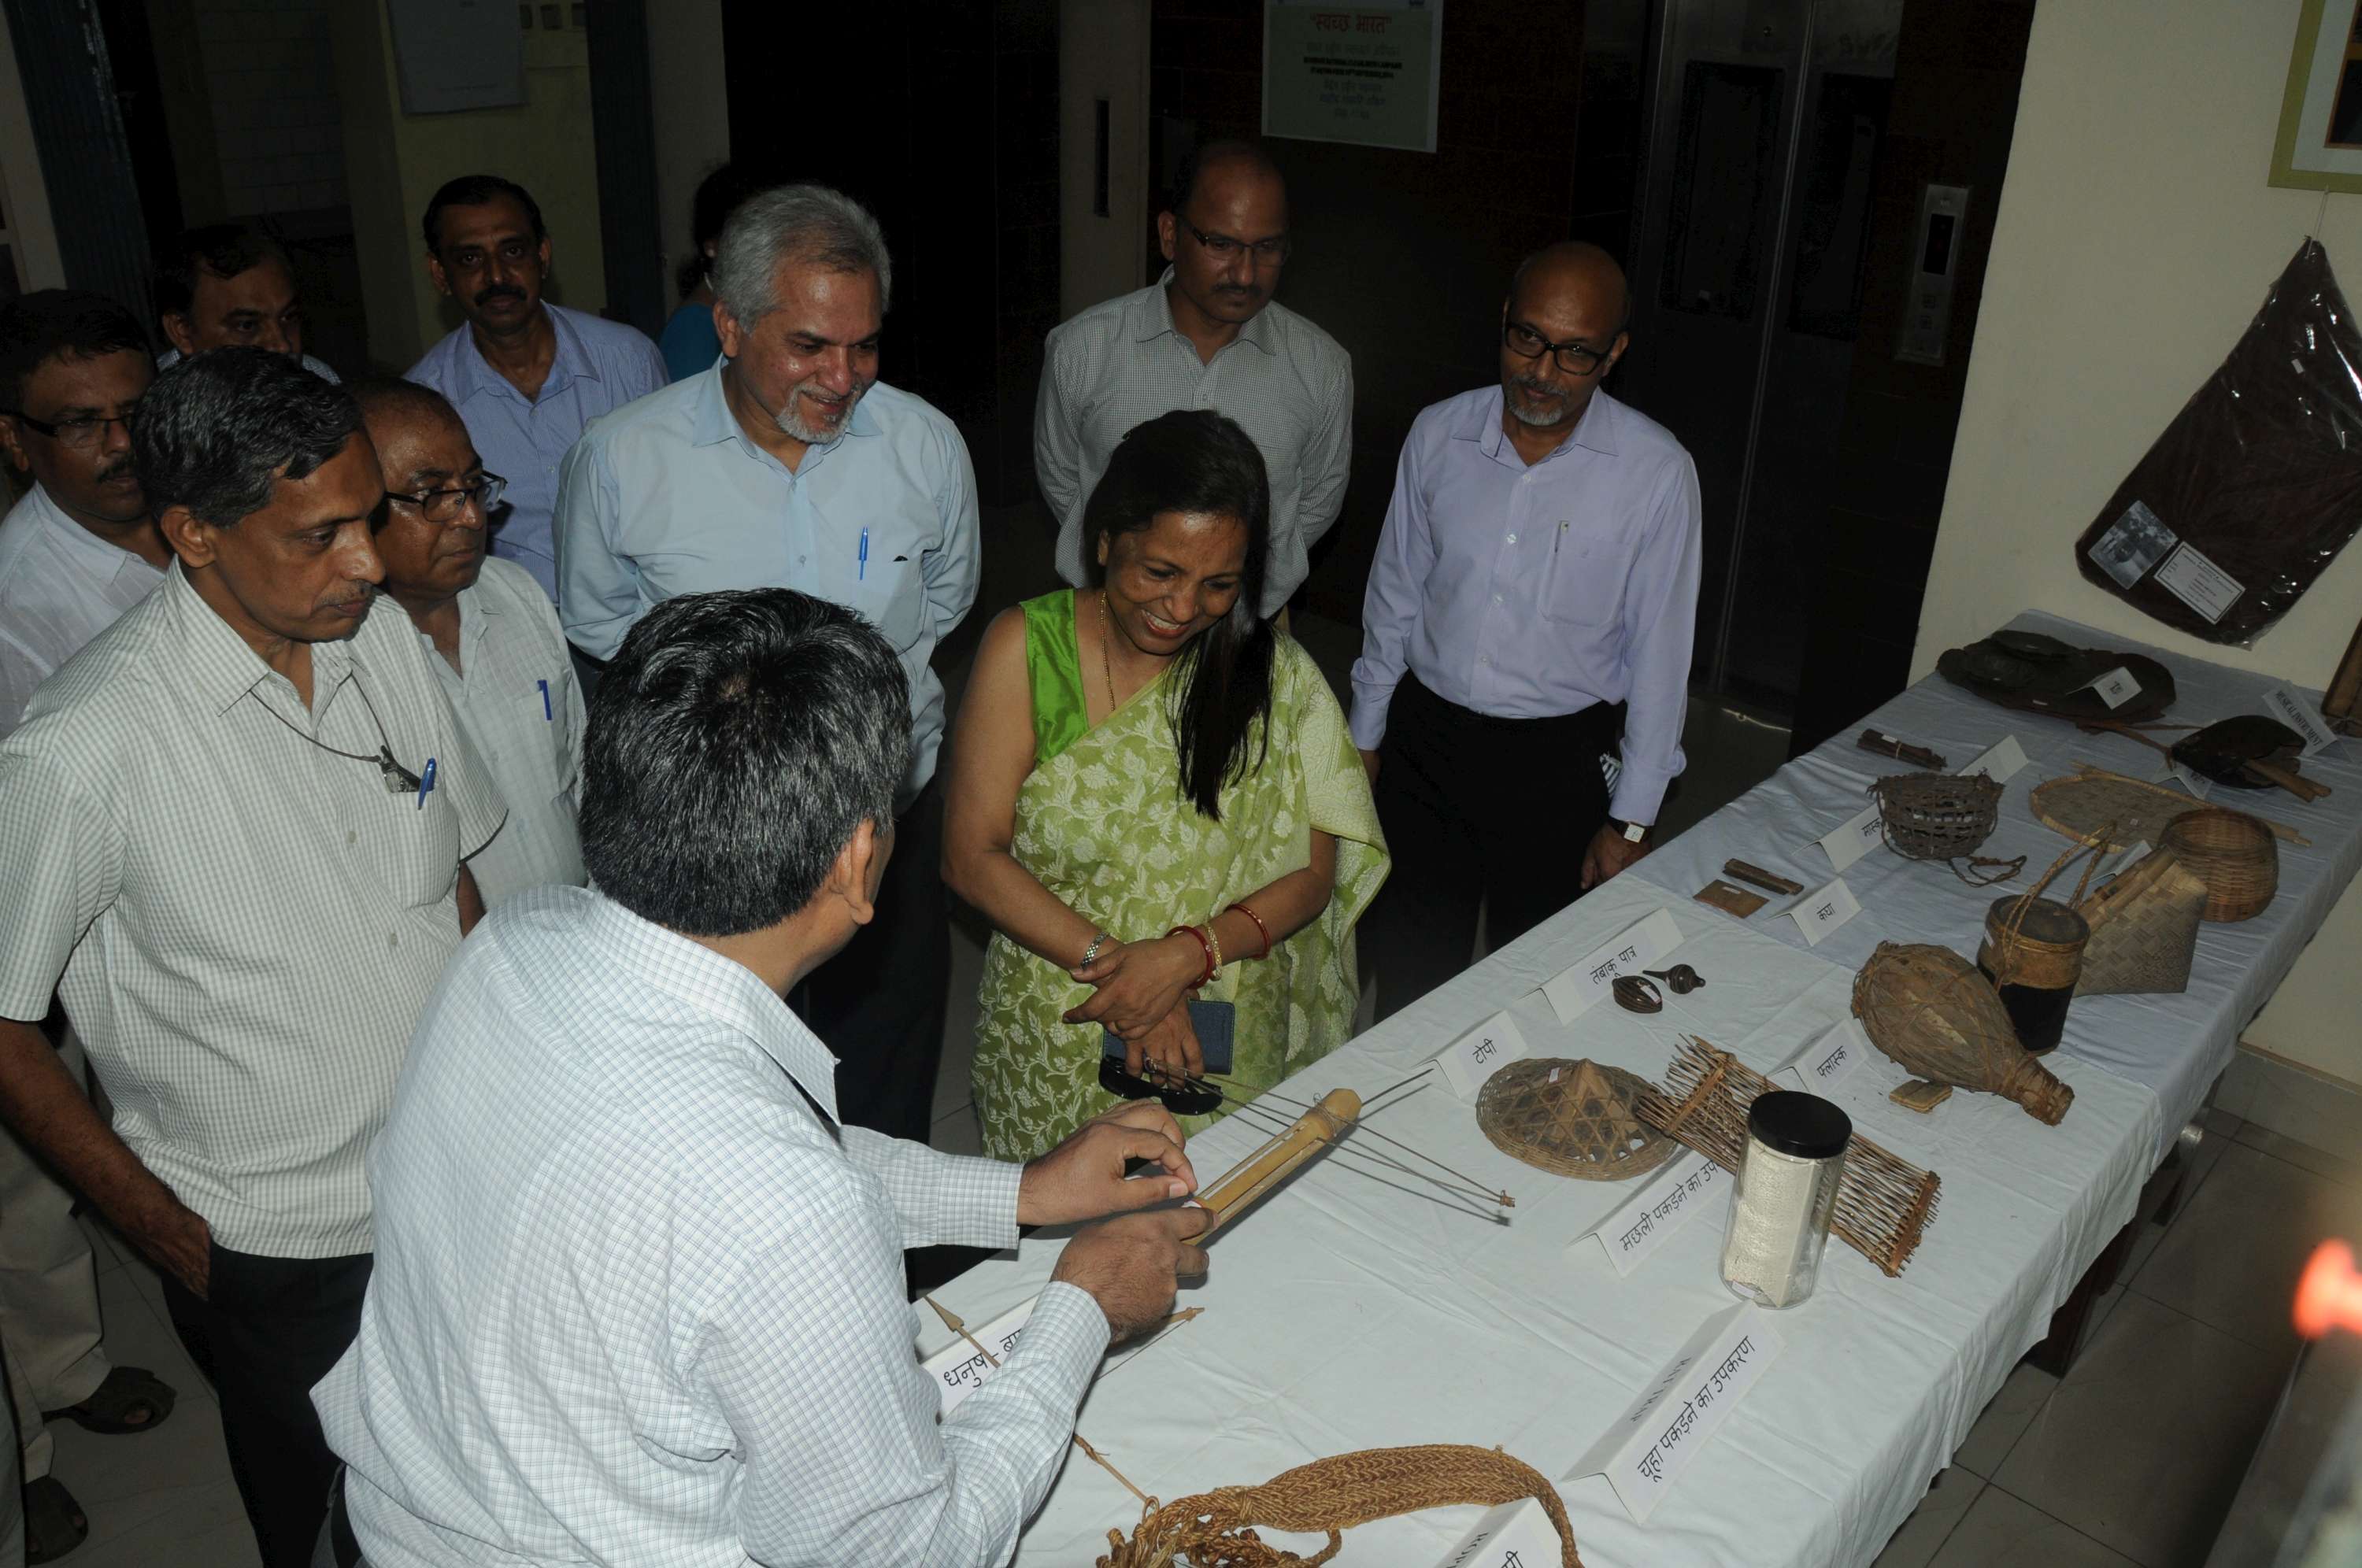 Viewing of Ethnobotanical display by Addl. Secretary at CNH Building